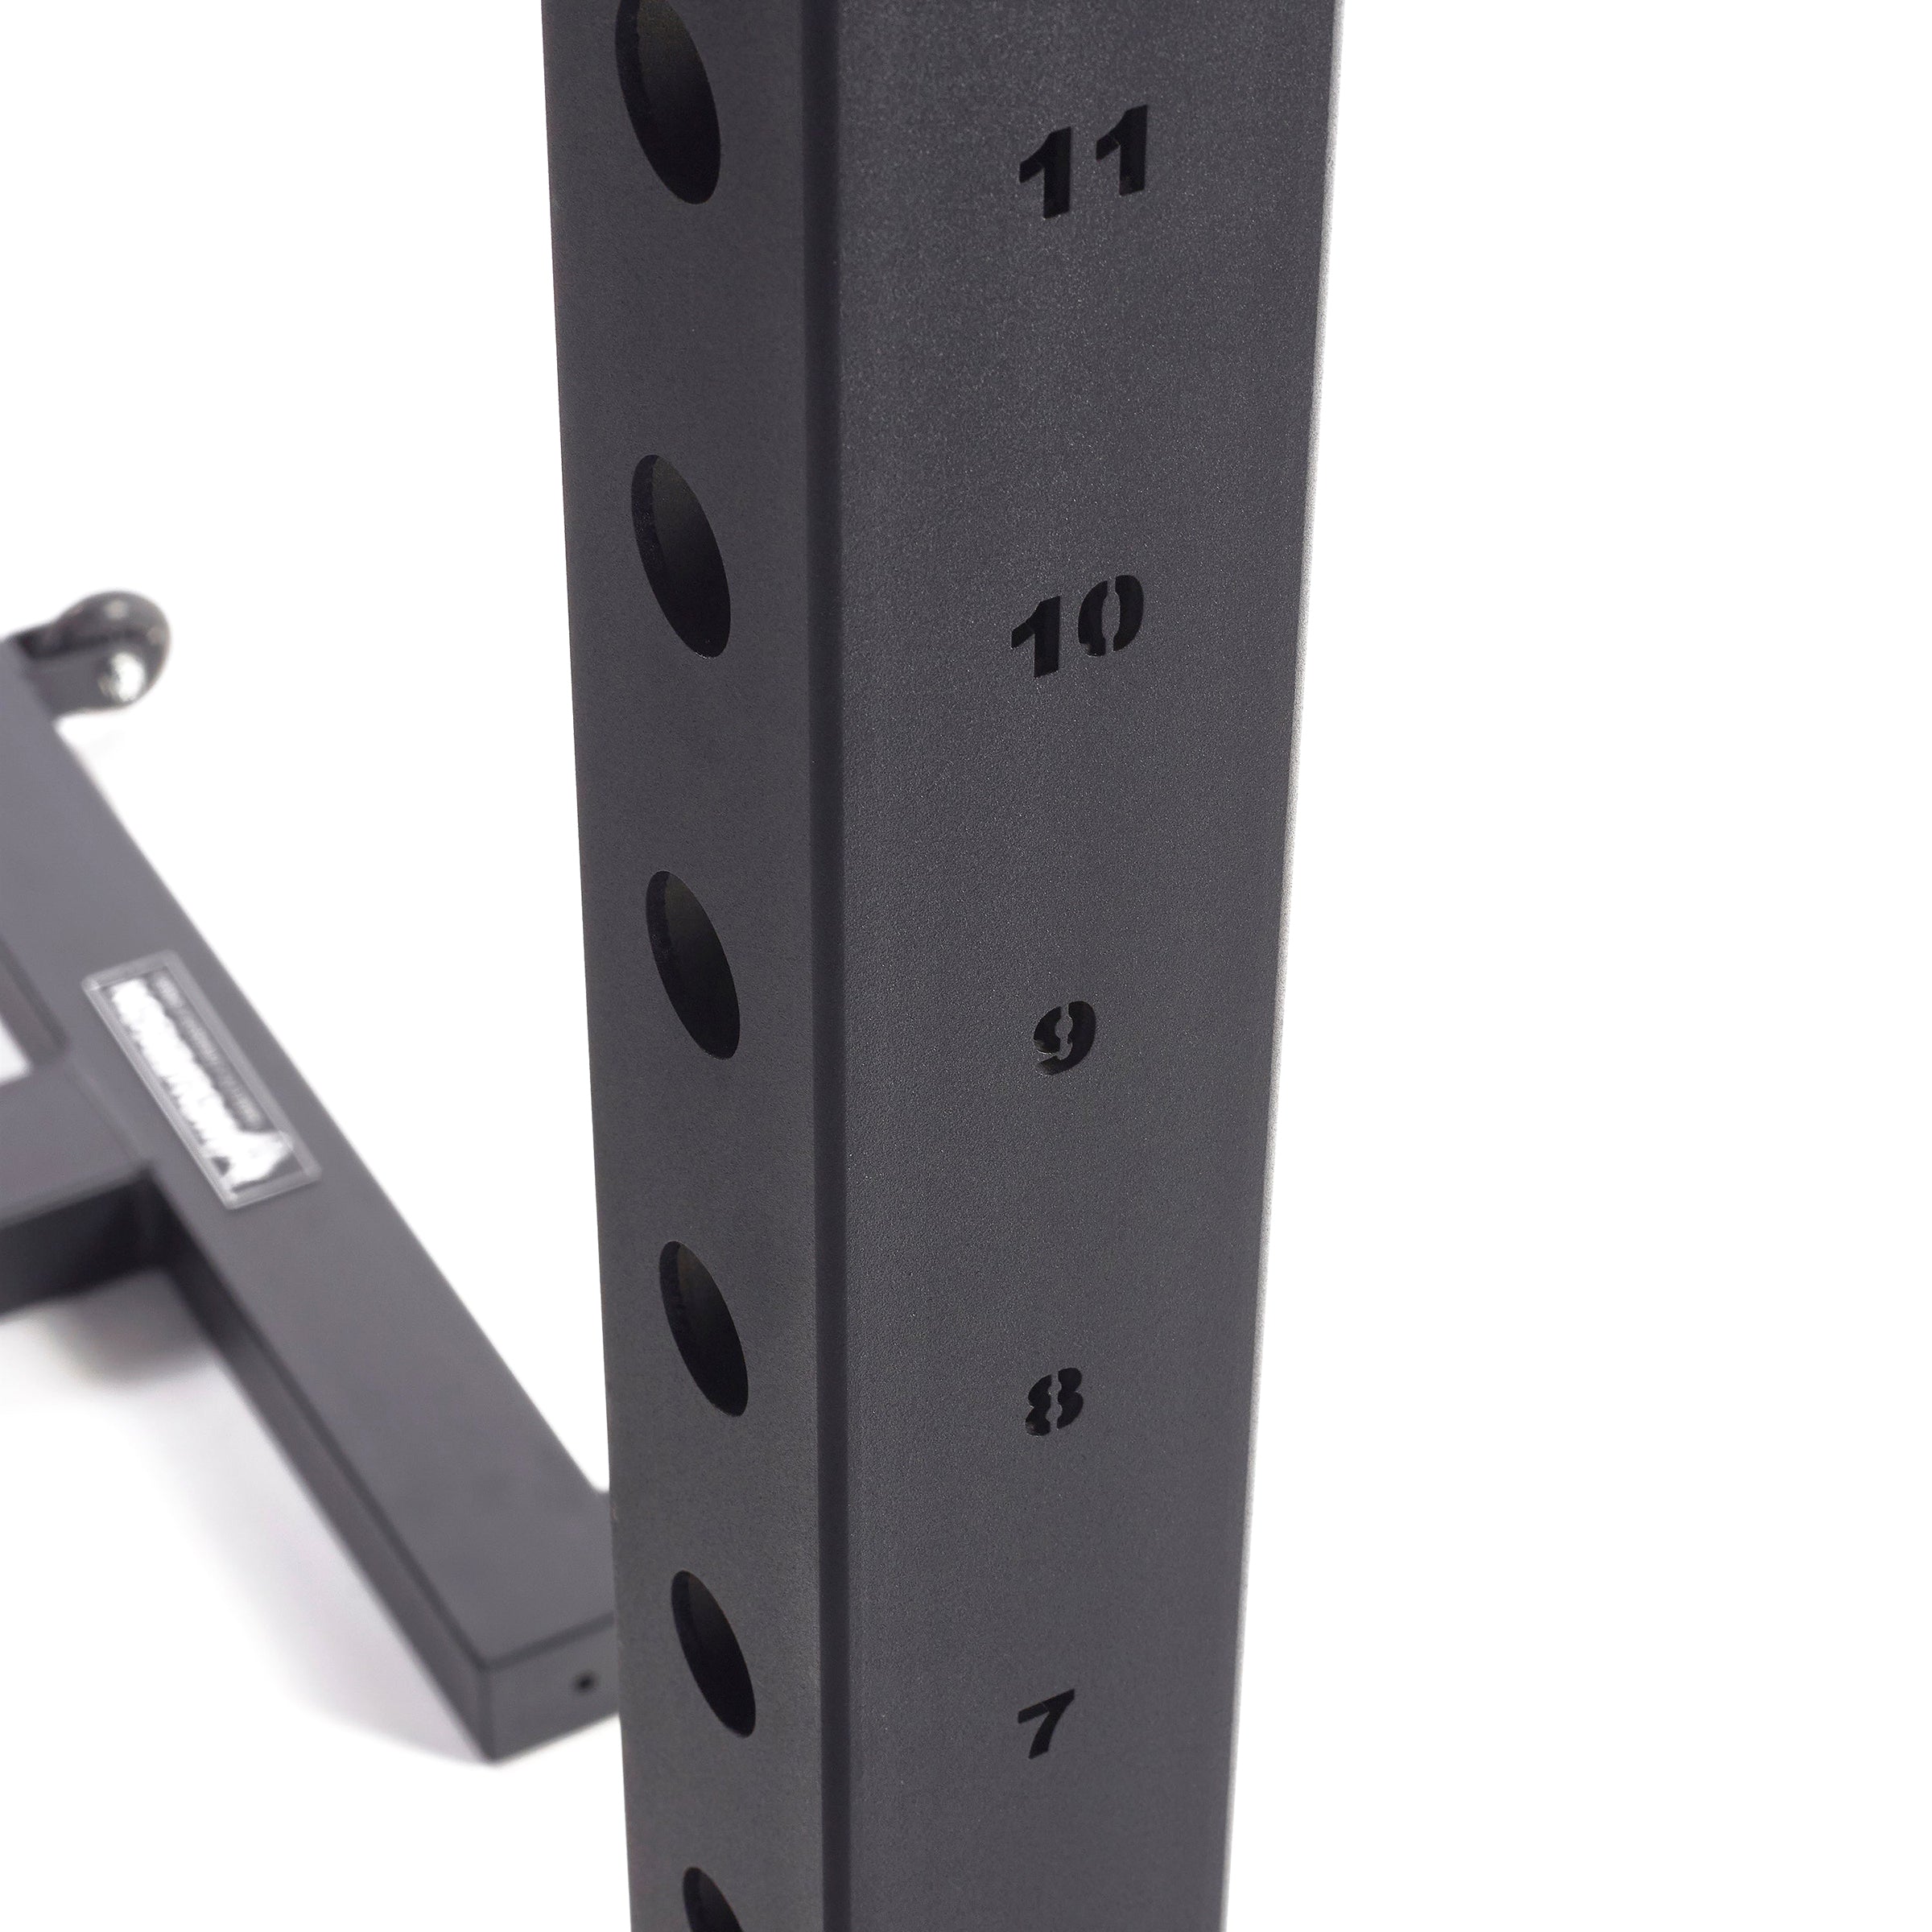 Bison Series Mobile Squat Stand - Wolverson Fitness